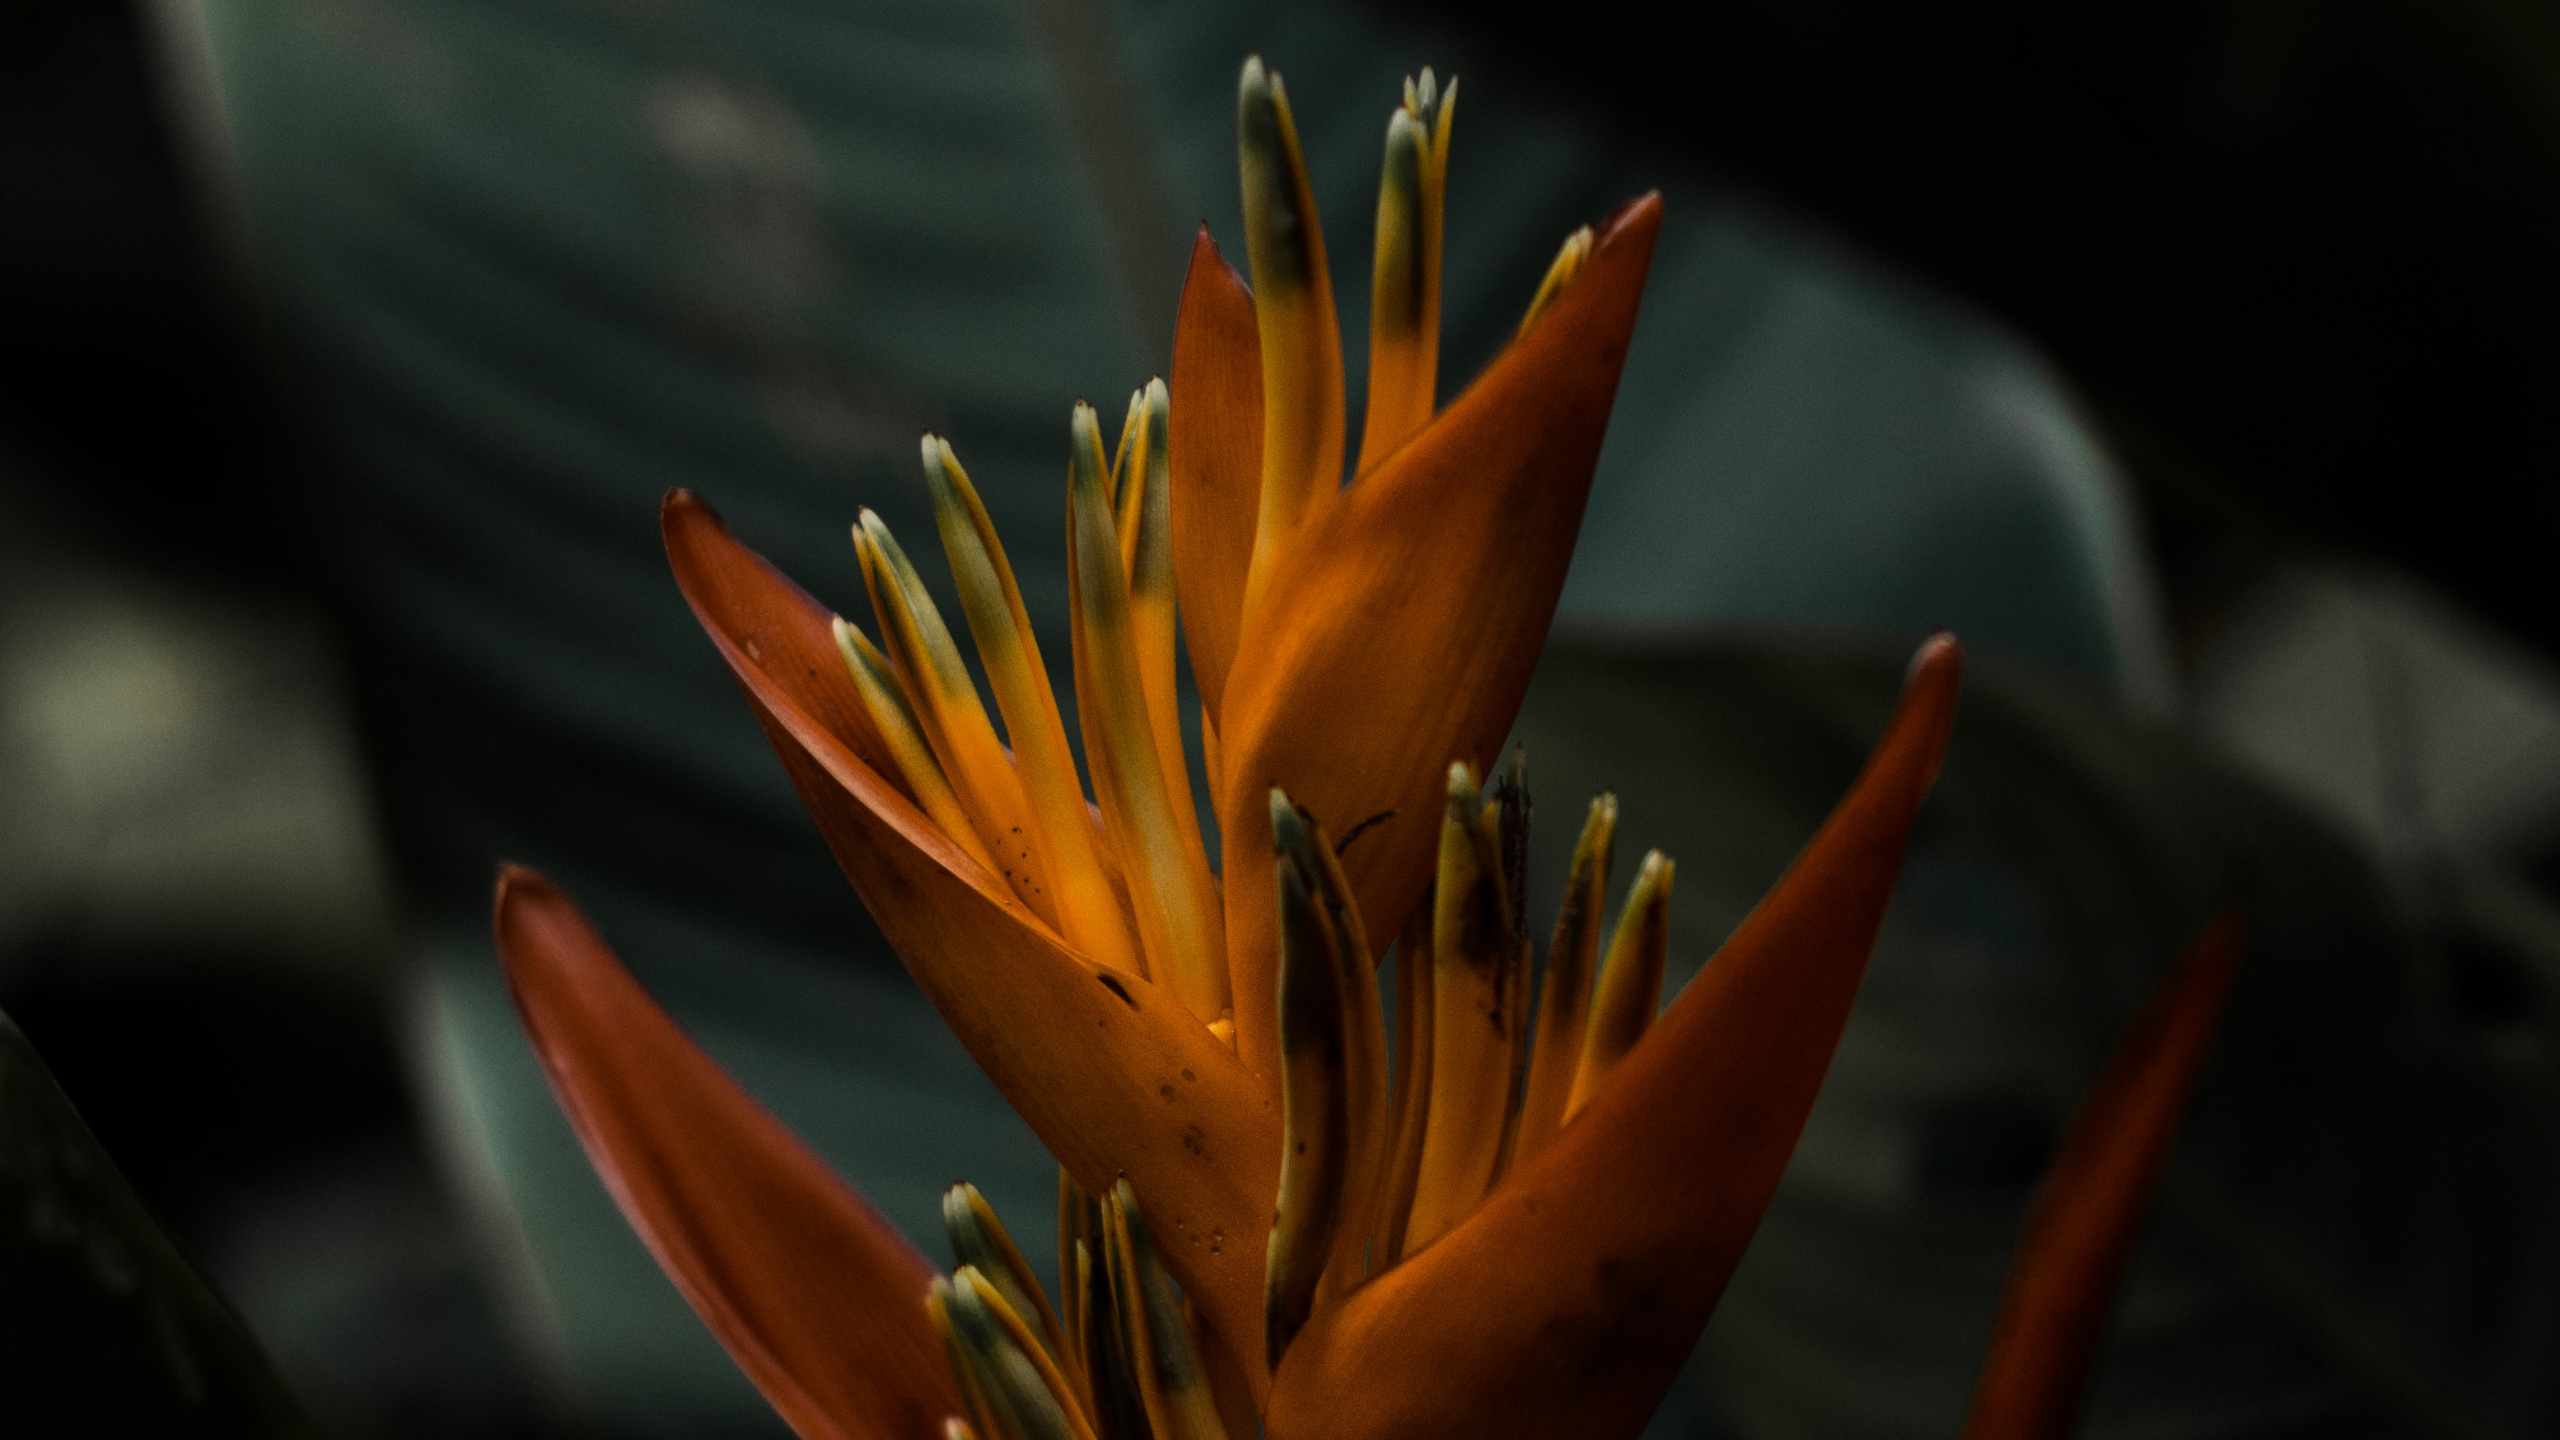 Orange Flower in Close up Photography. Wallpaper in 2560x1440 Resolution